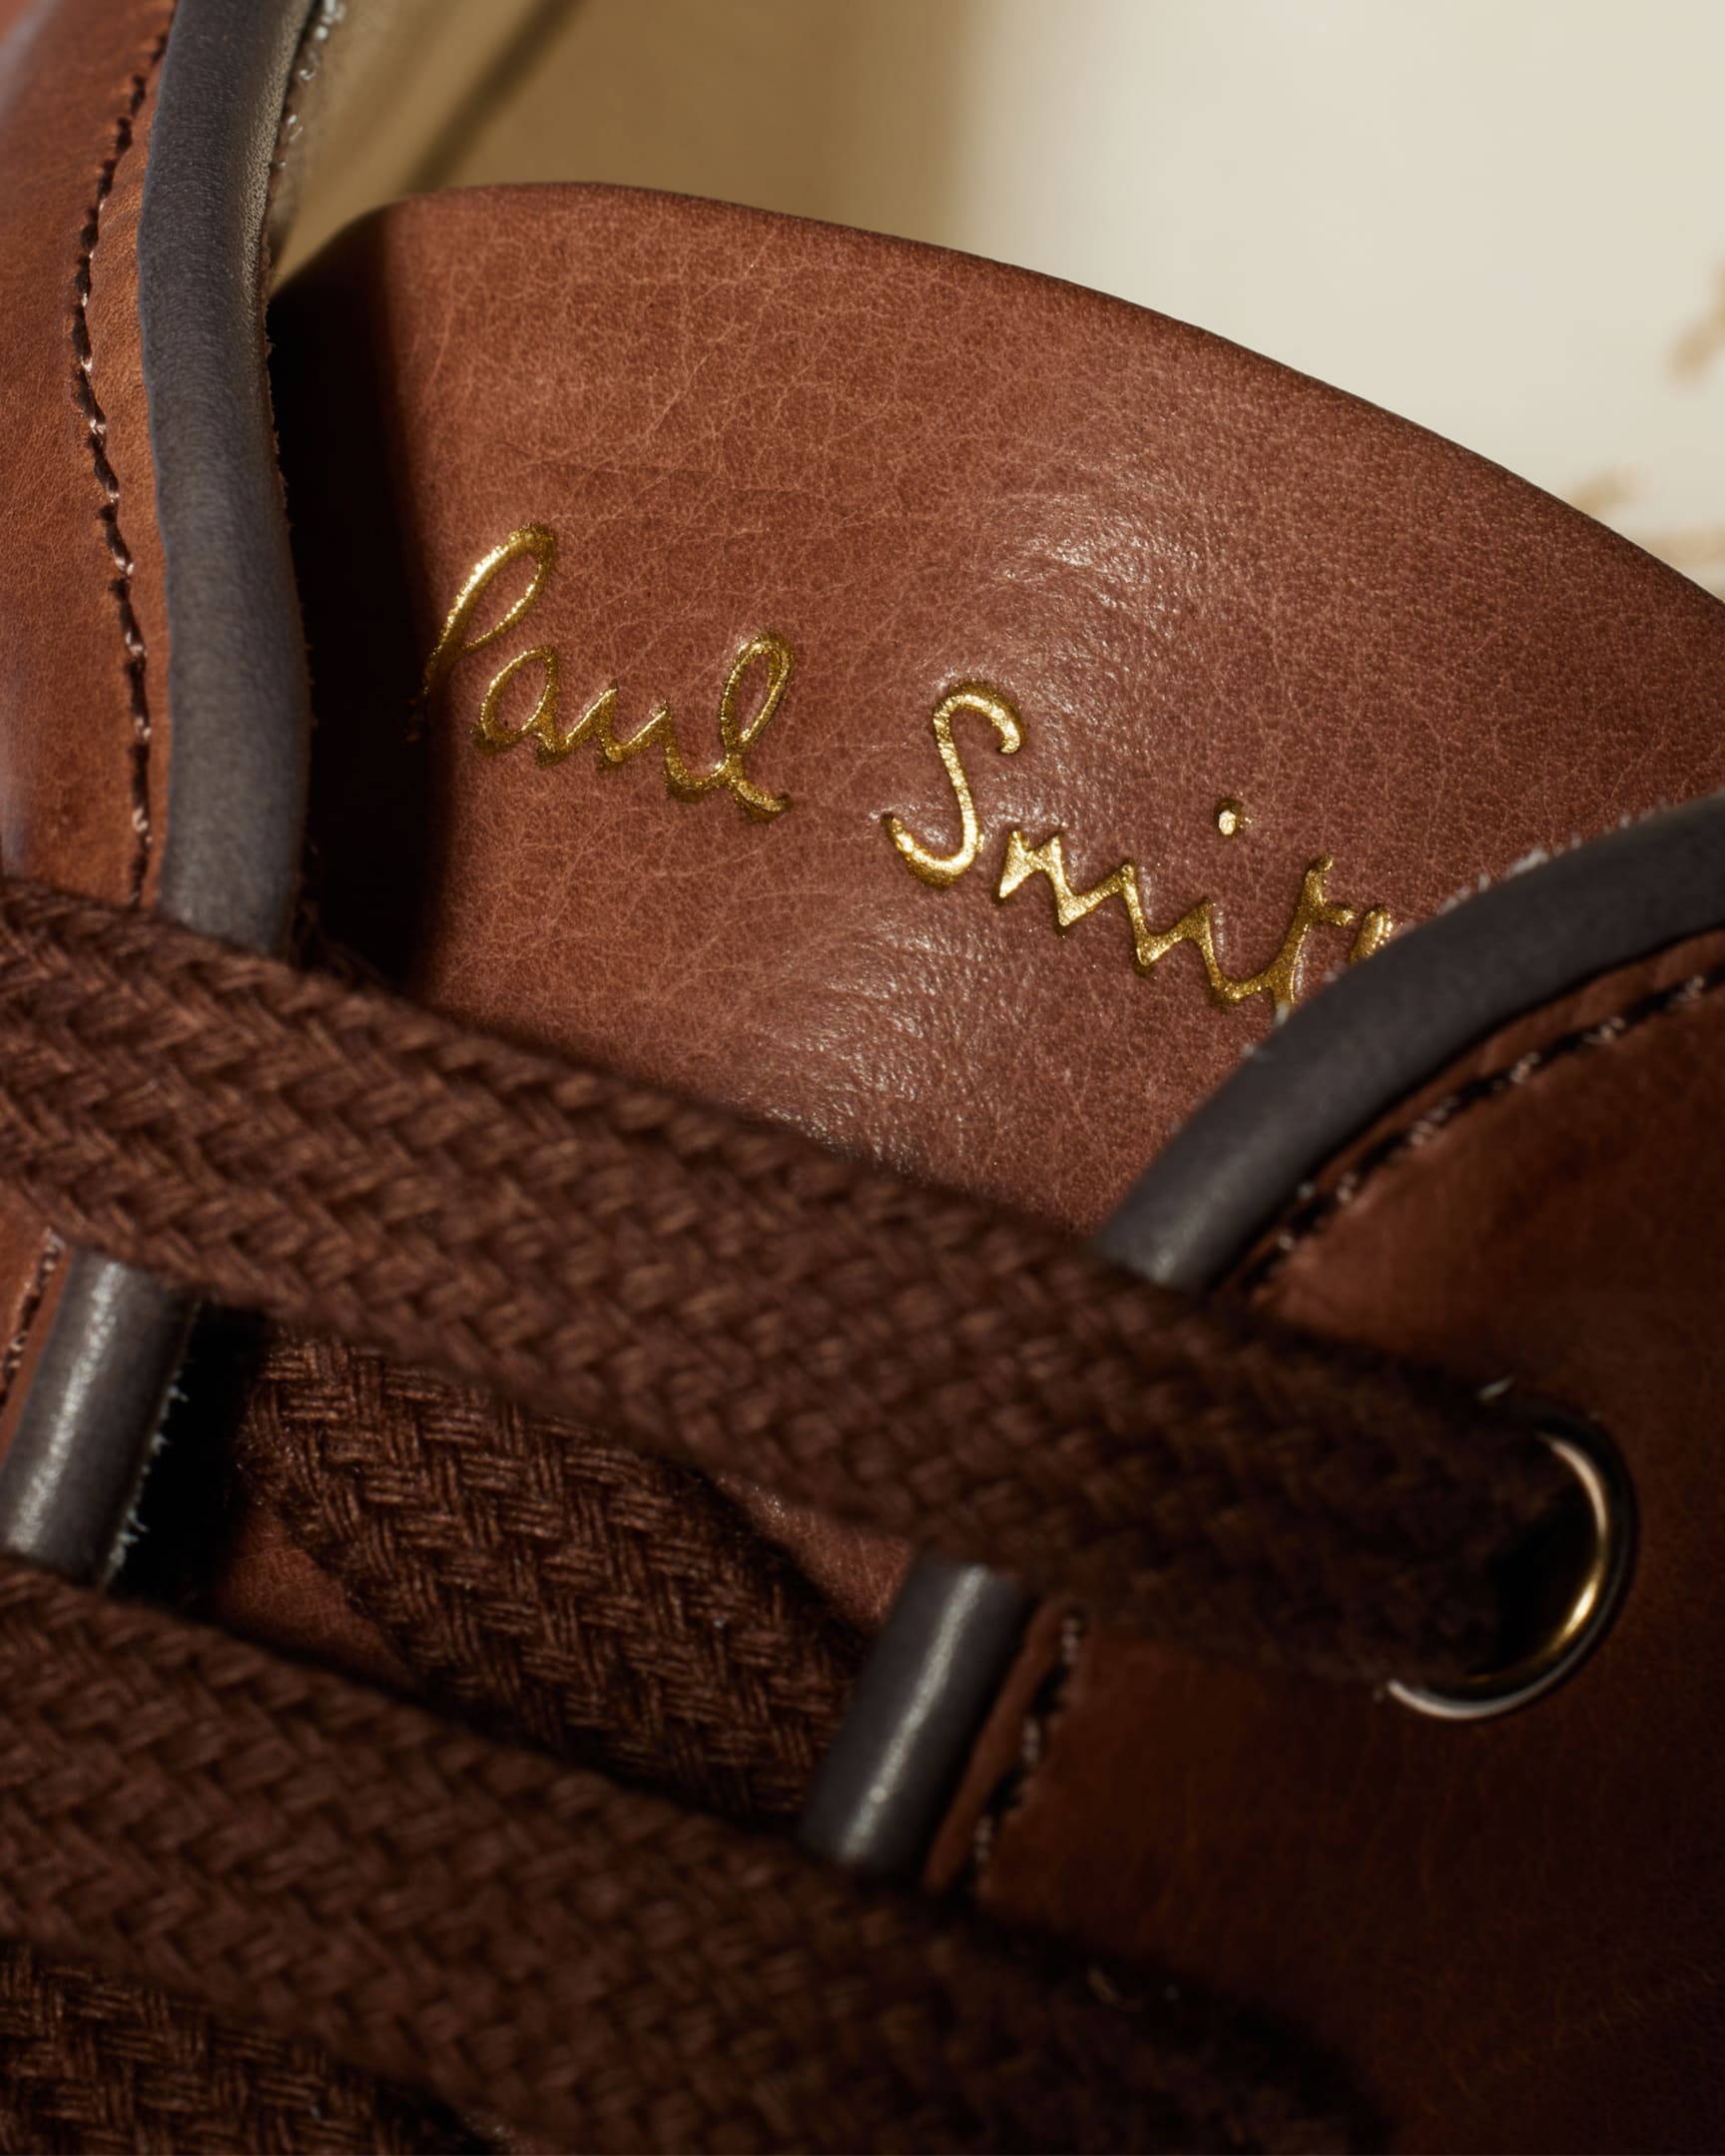 Detail View - Tan Leather 'Basso' Trainers Paul Smith